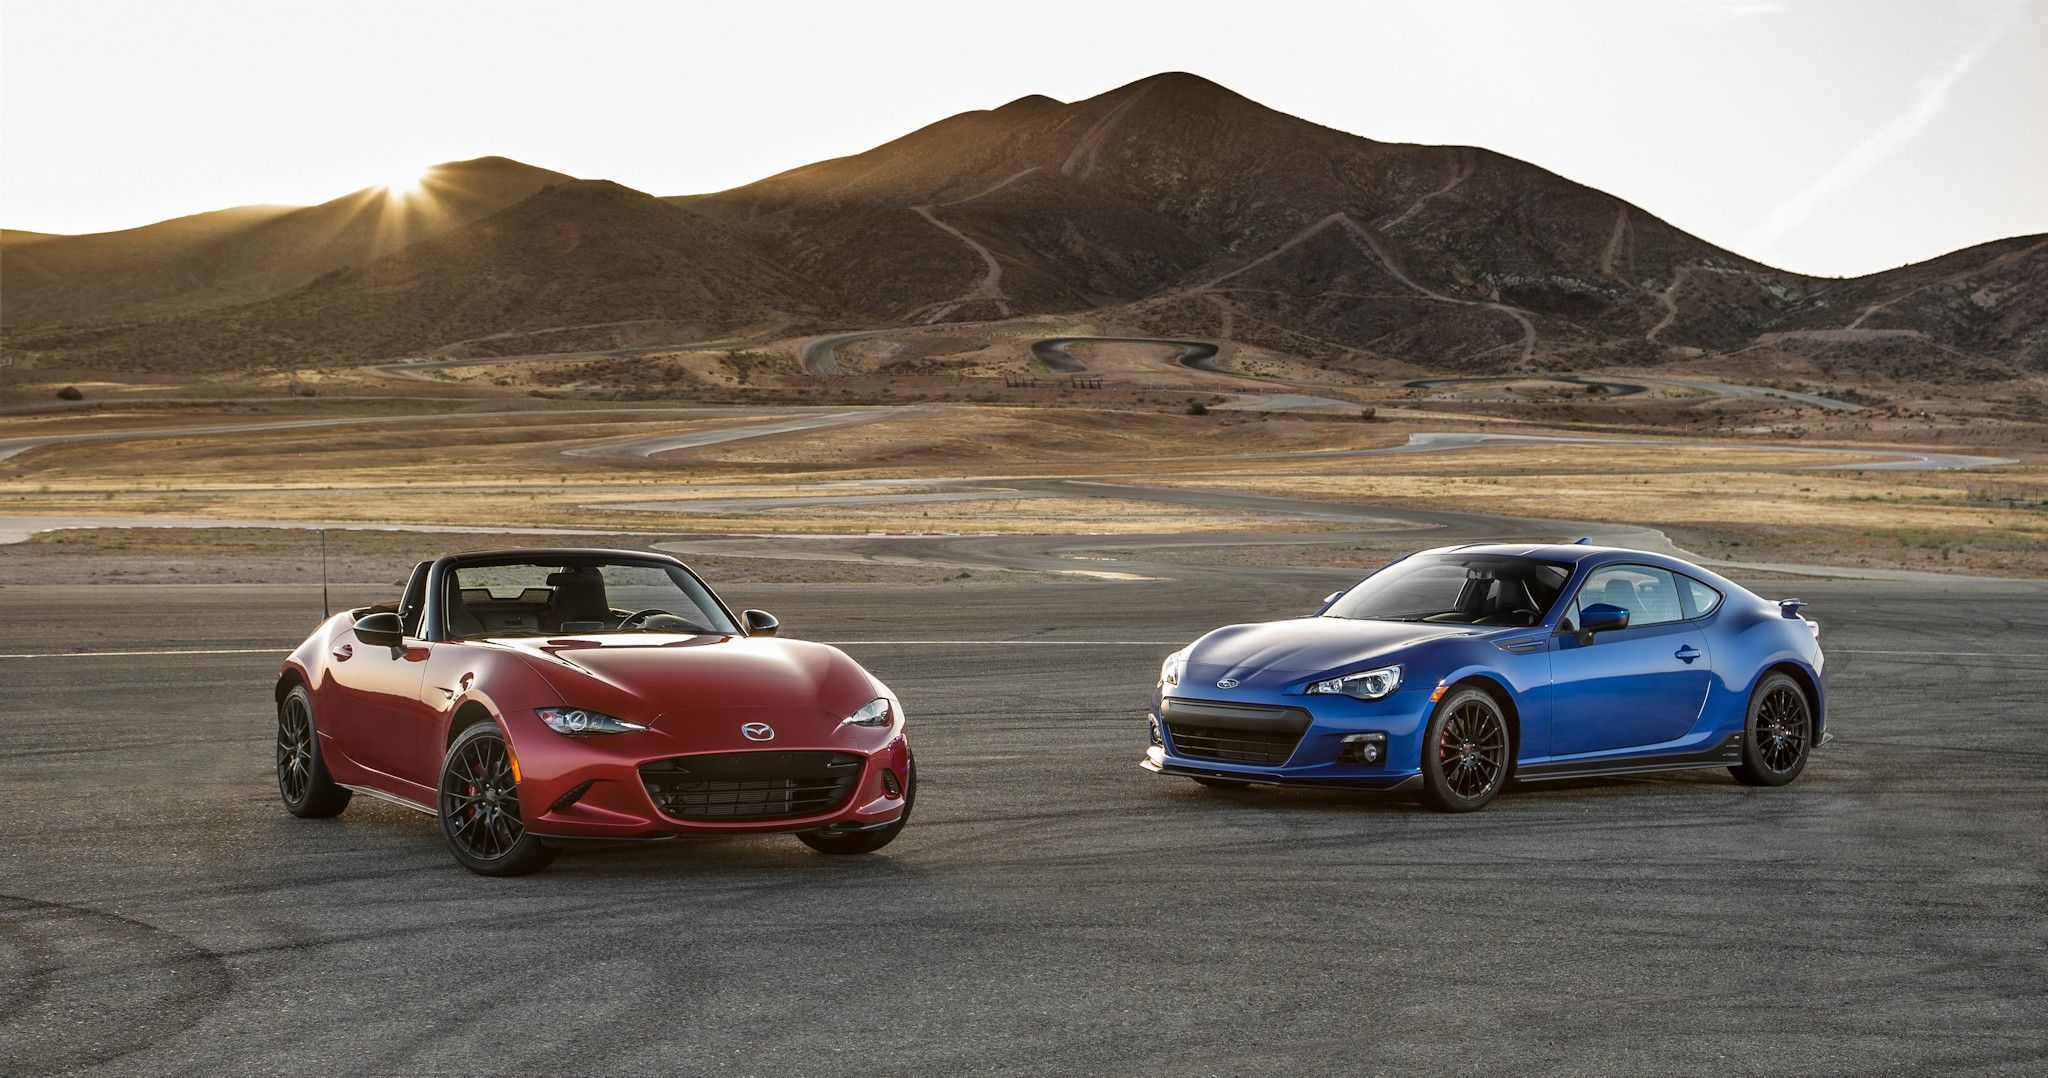 Battle of the baby sports cars